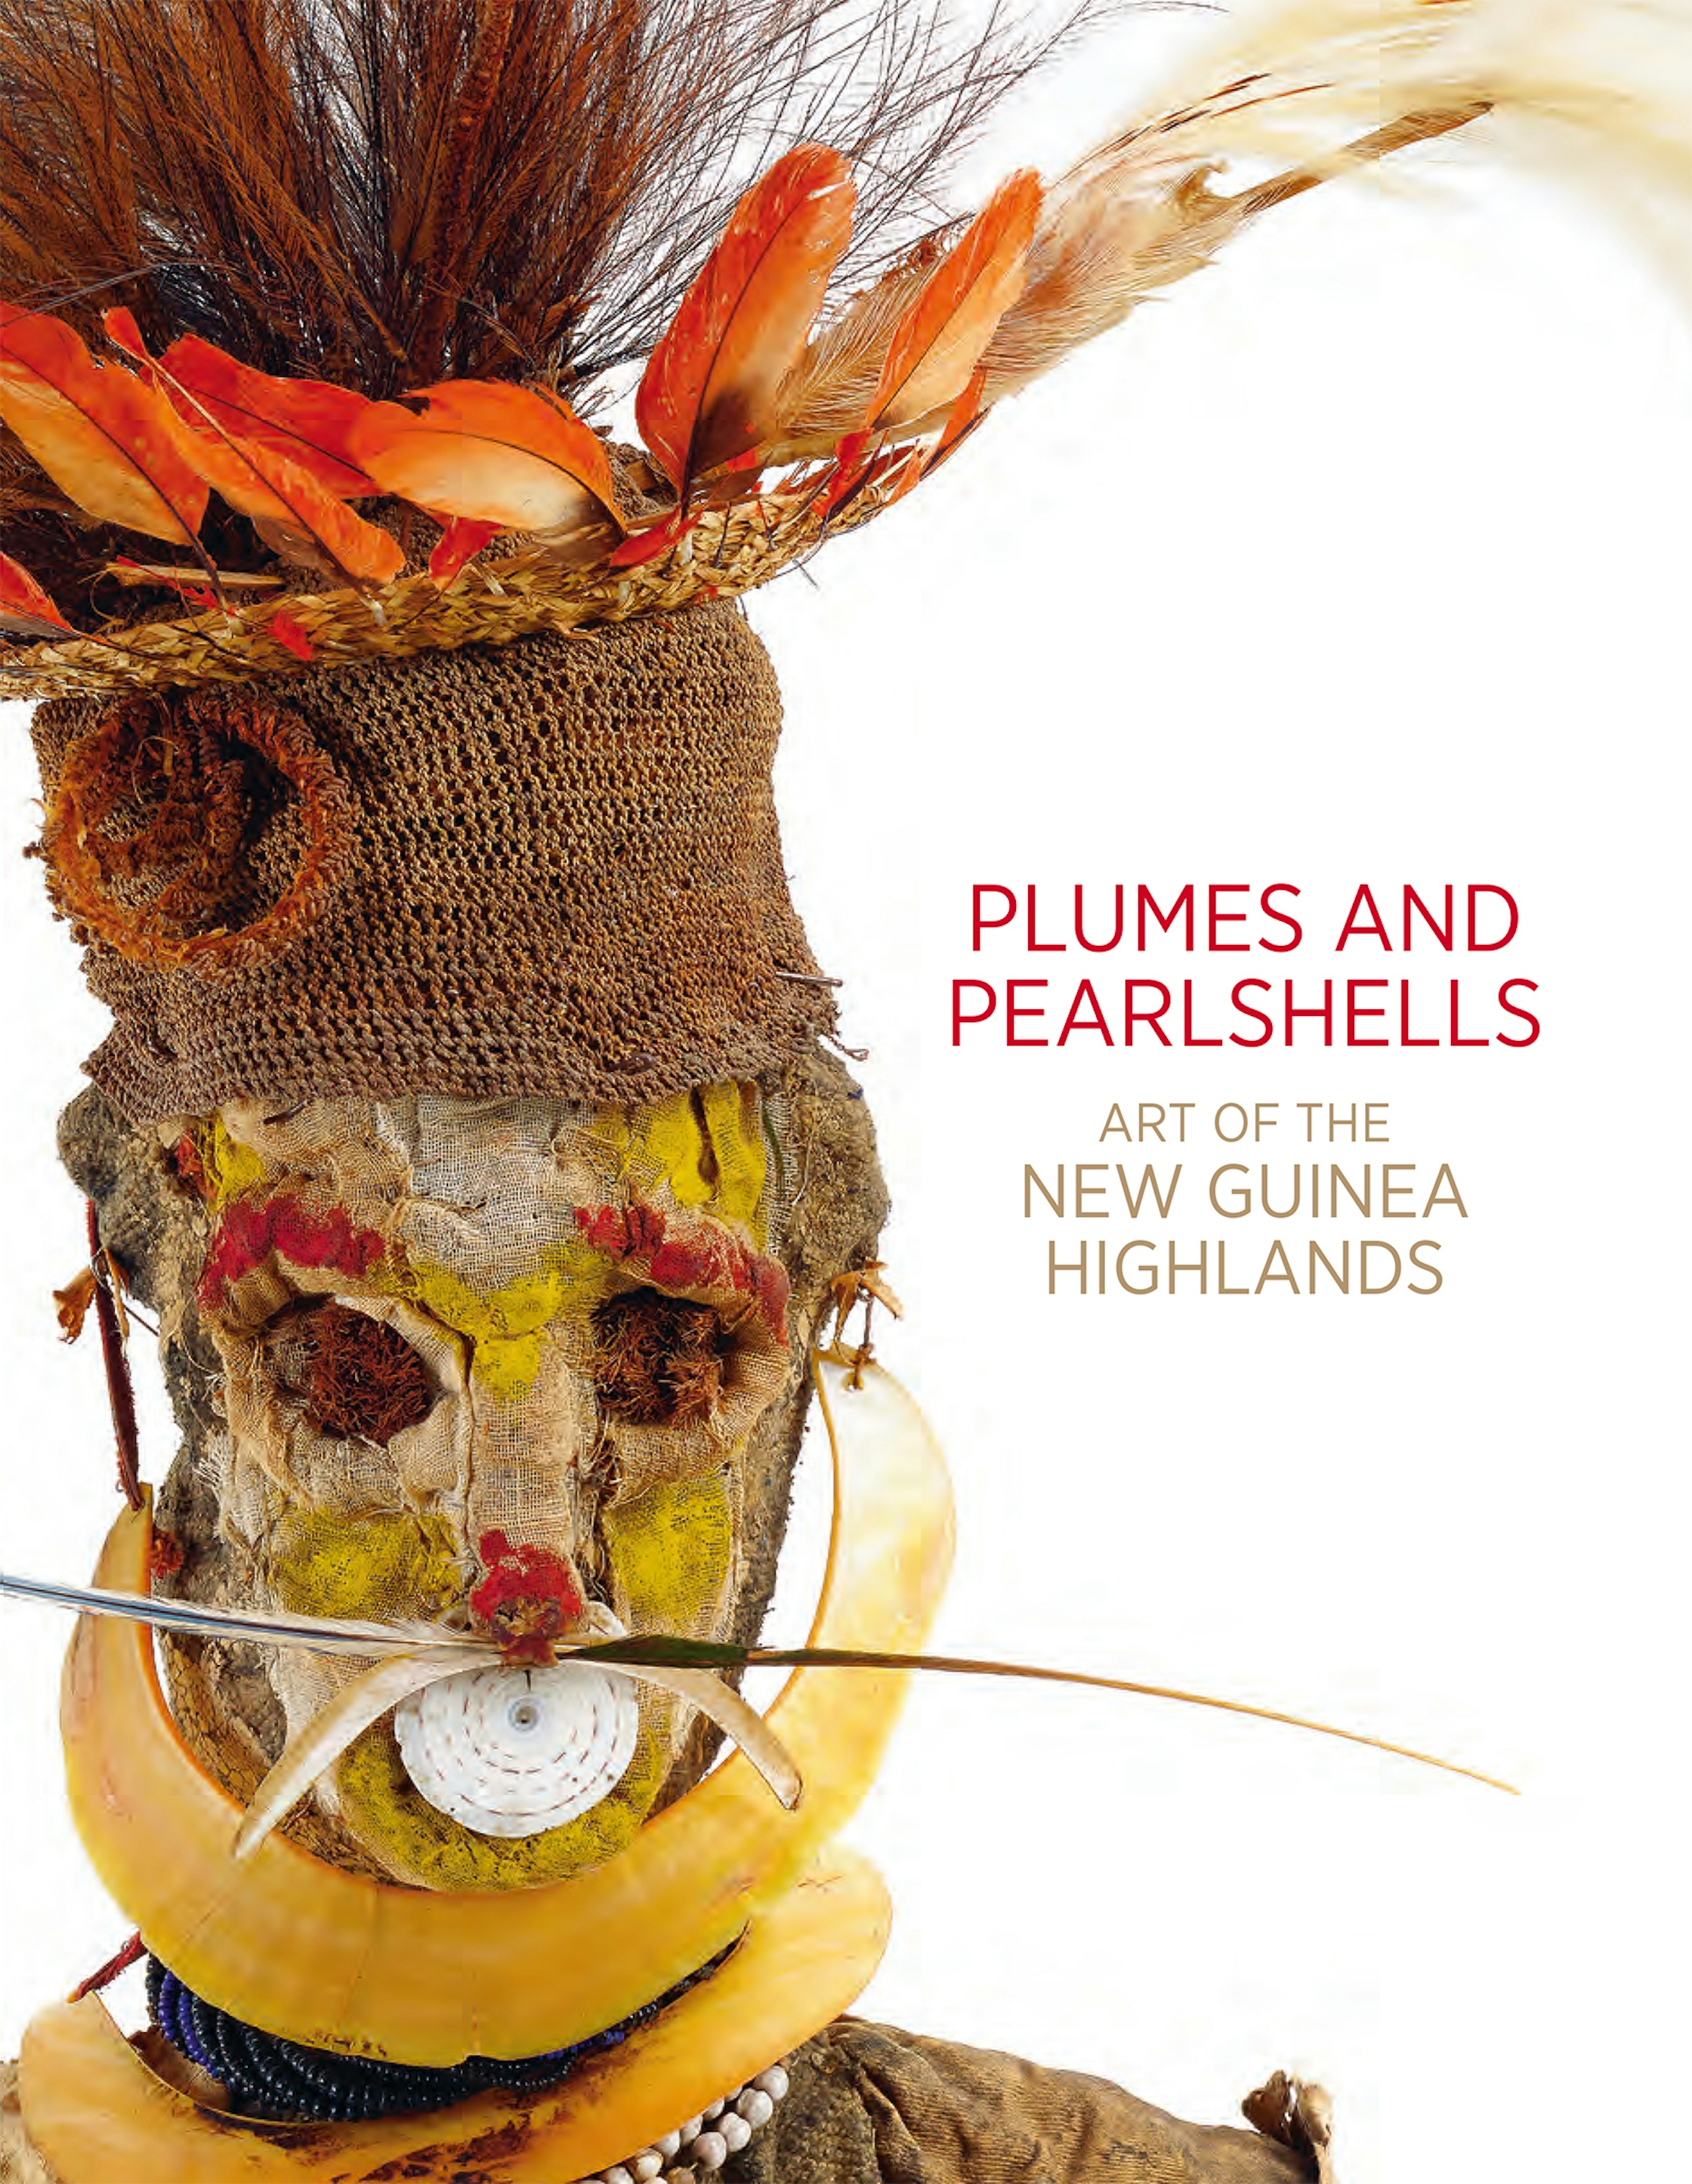 Plumes and Pearlshells